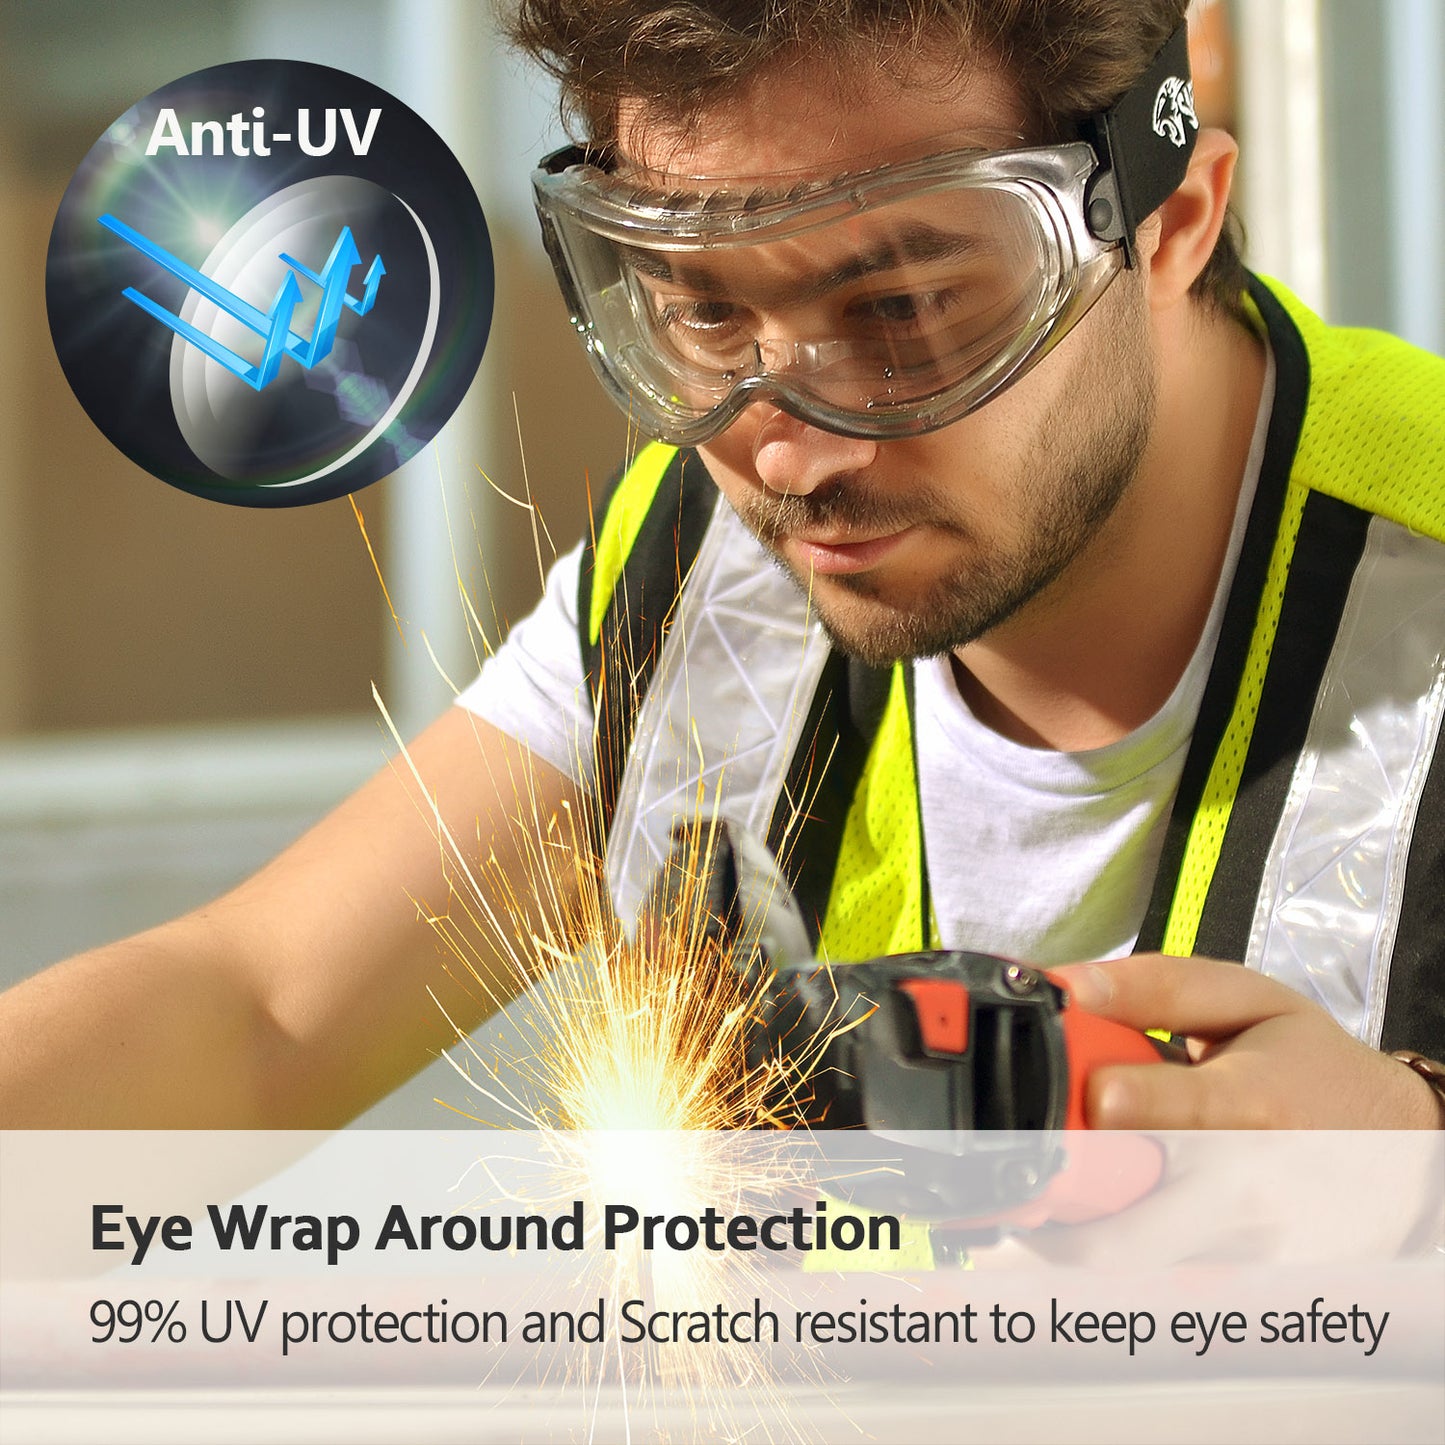 SAFEYEAR Anti Fog Safety Goggles- SG007 HD Scratch Resistant Safety Glasses Lens for Men and Women, VU Protection Over Glasses Work Goggles for DIY, Lab, Welding, Grinding, Chemistry